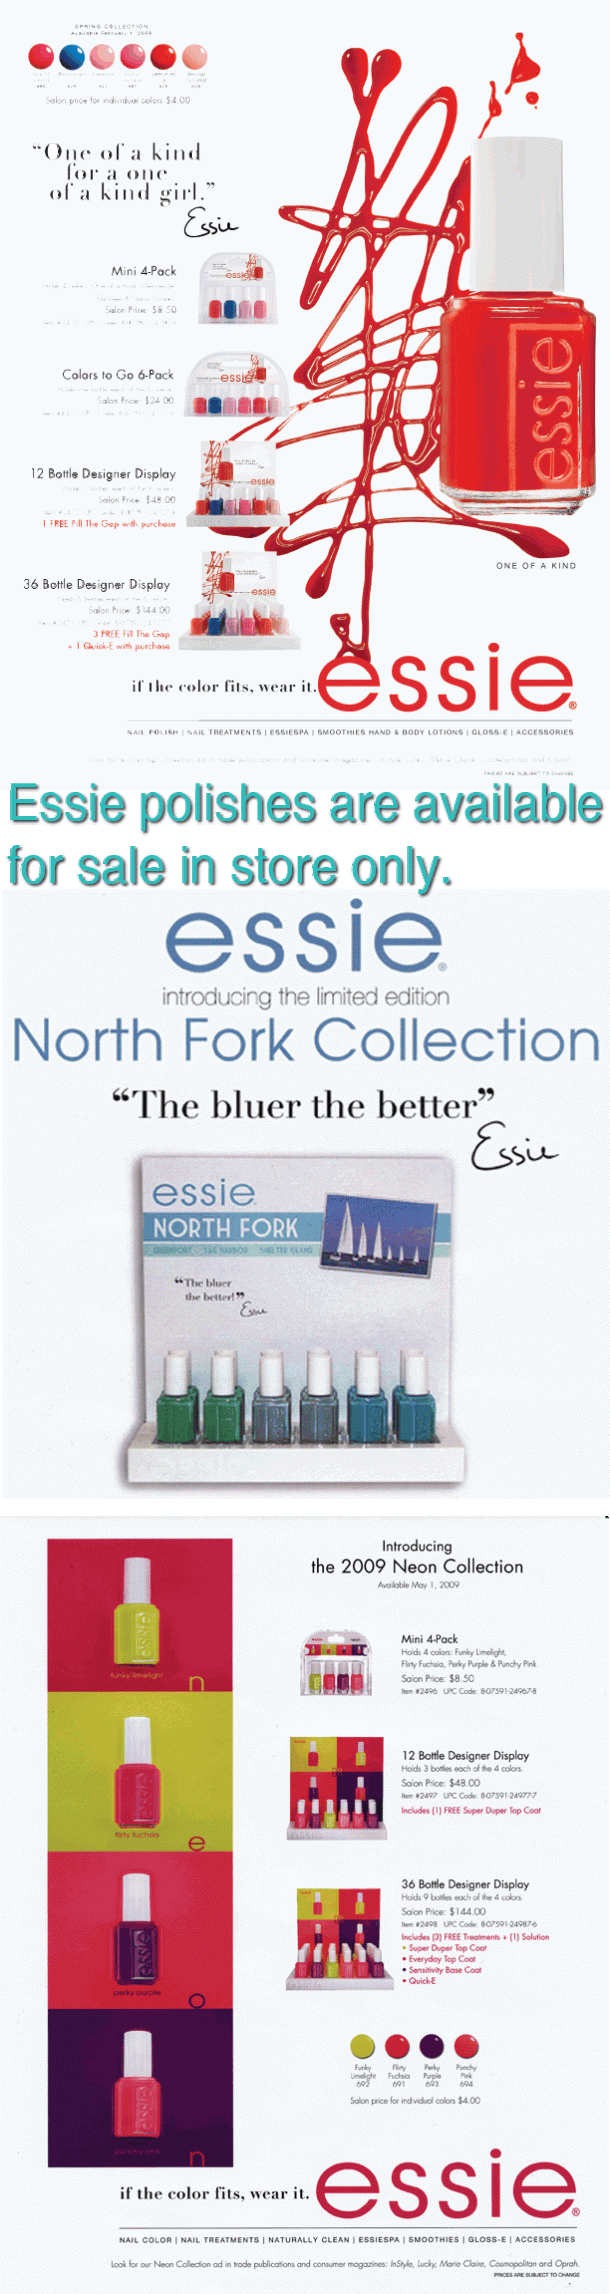 North Fork and Neon Collections!